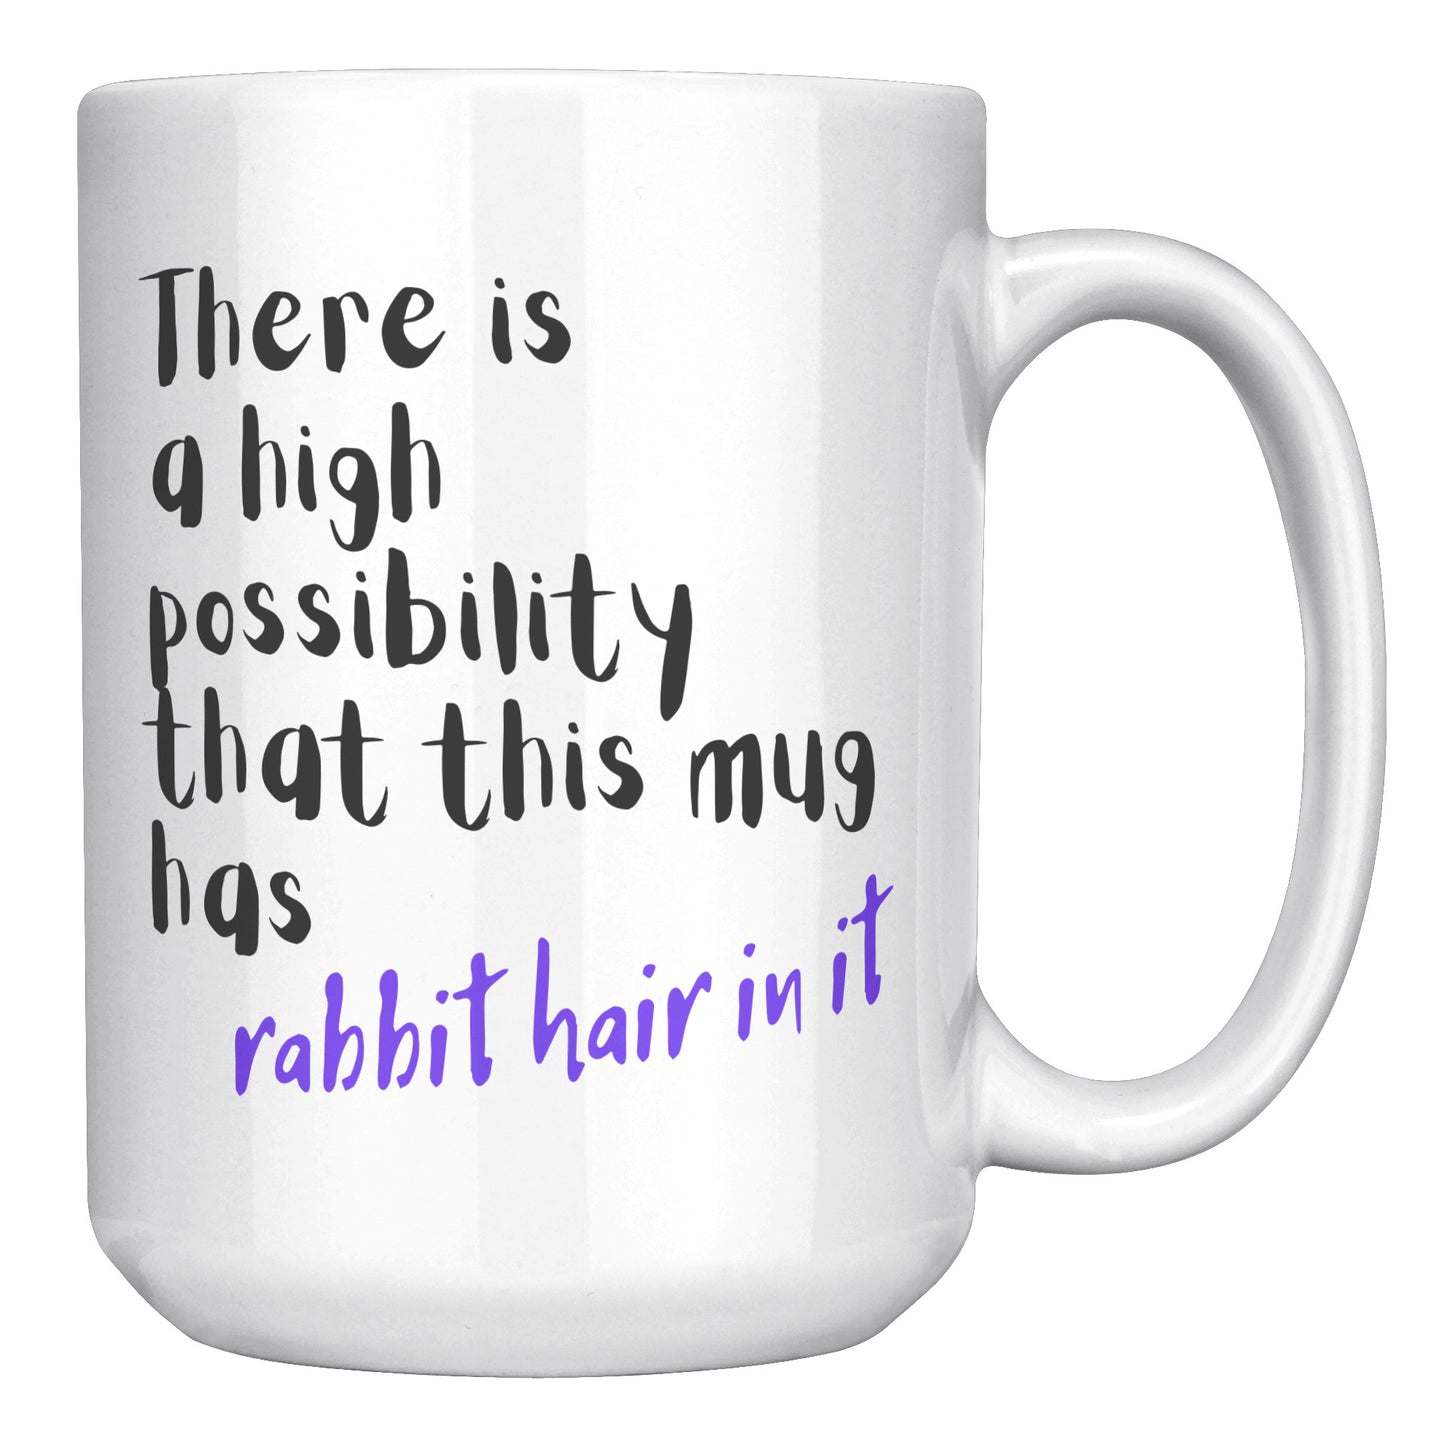 Comical Mug for the Rabbit Lover that Loves Coffee as Well